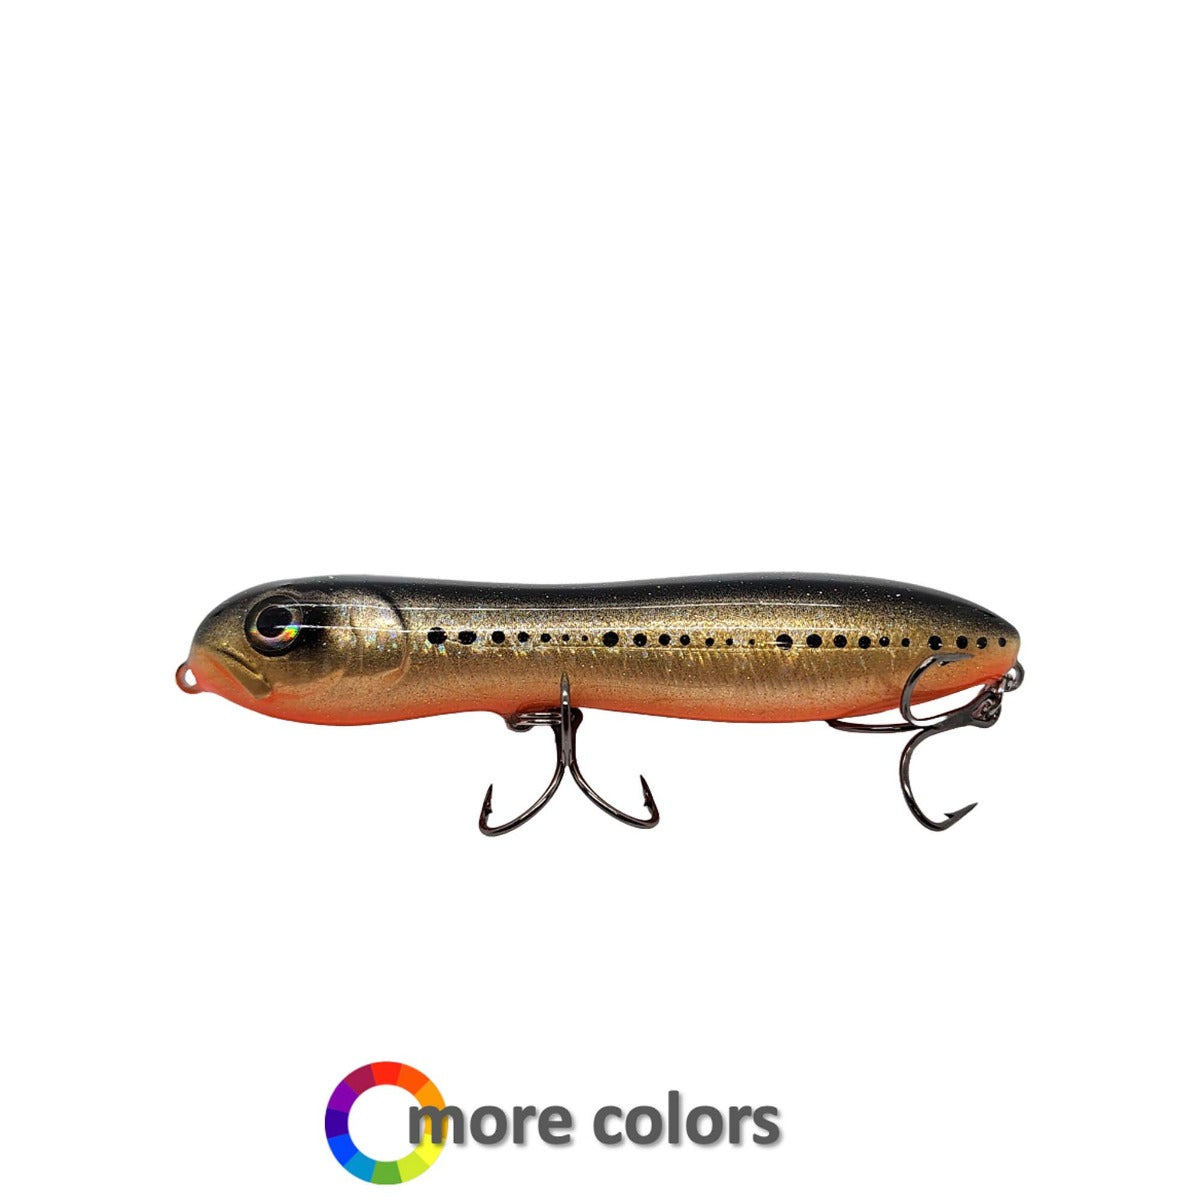 lures_sideview_morecolors_hlwn.jpg